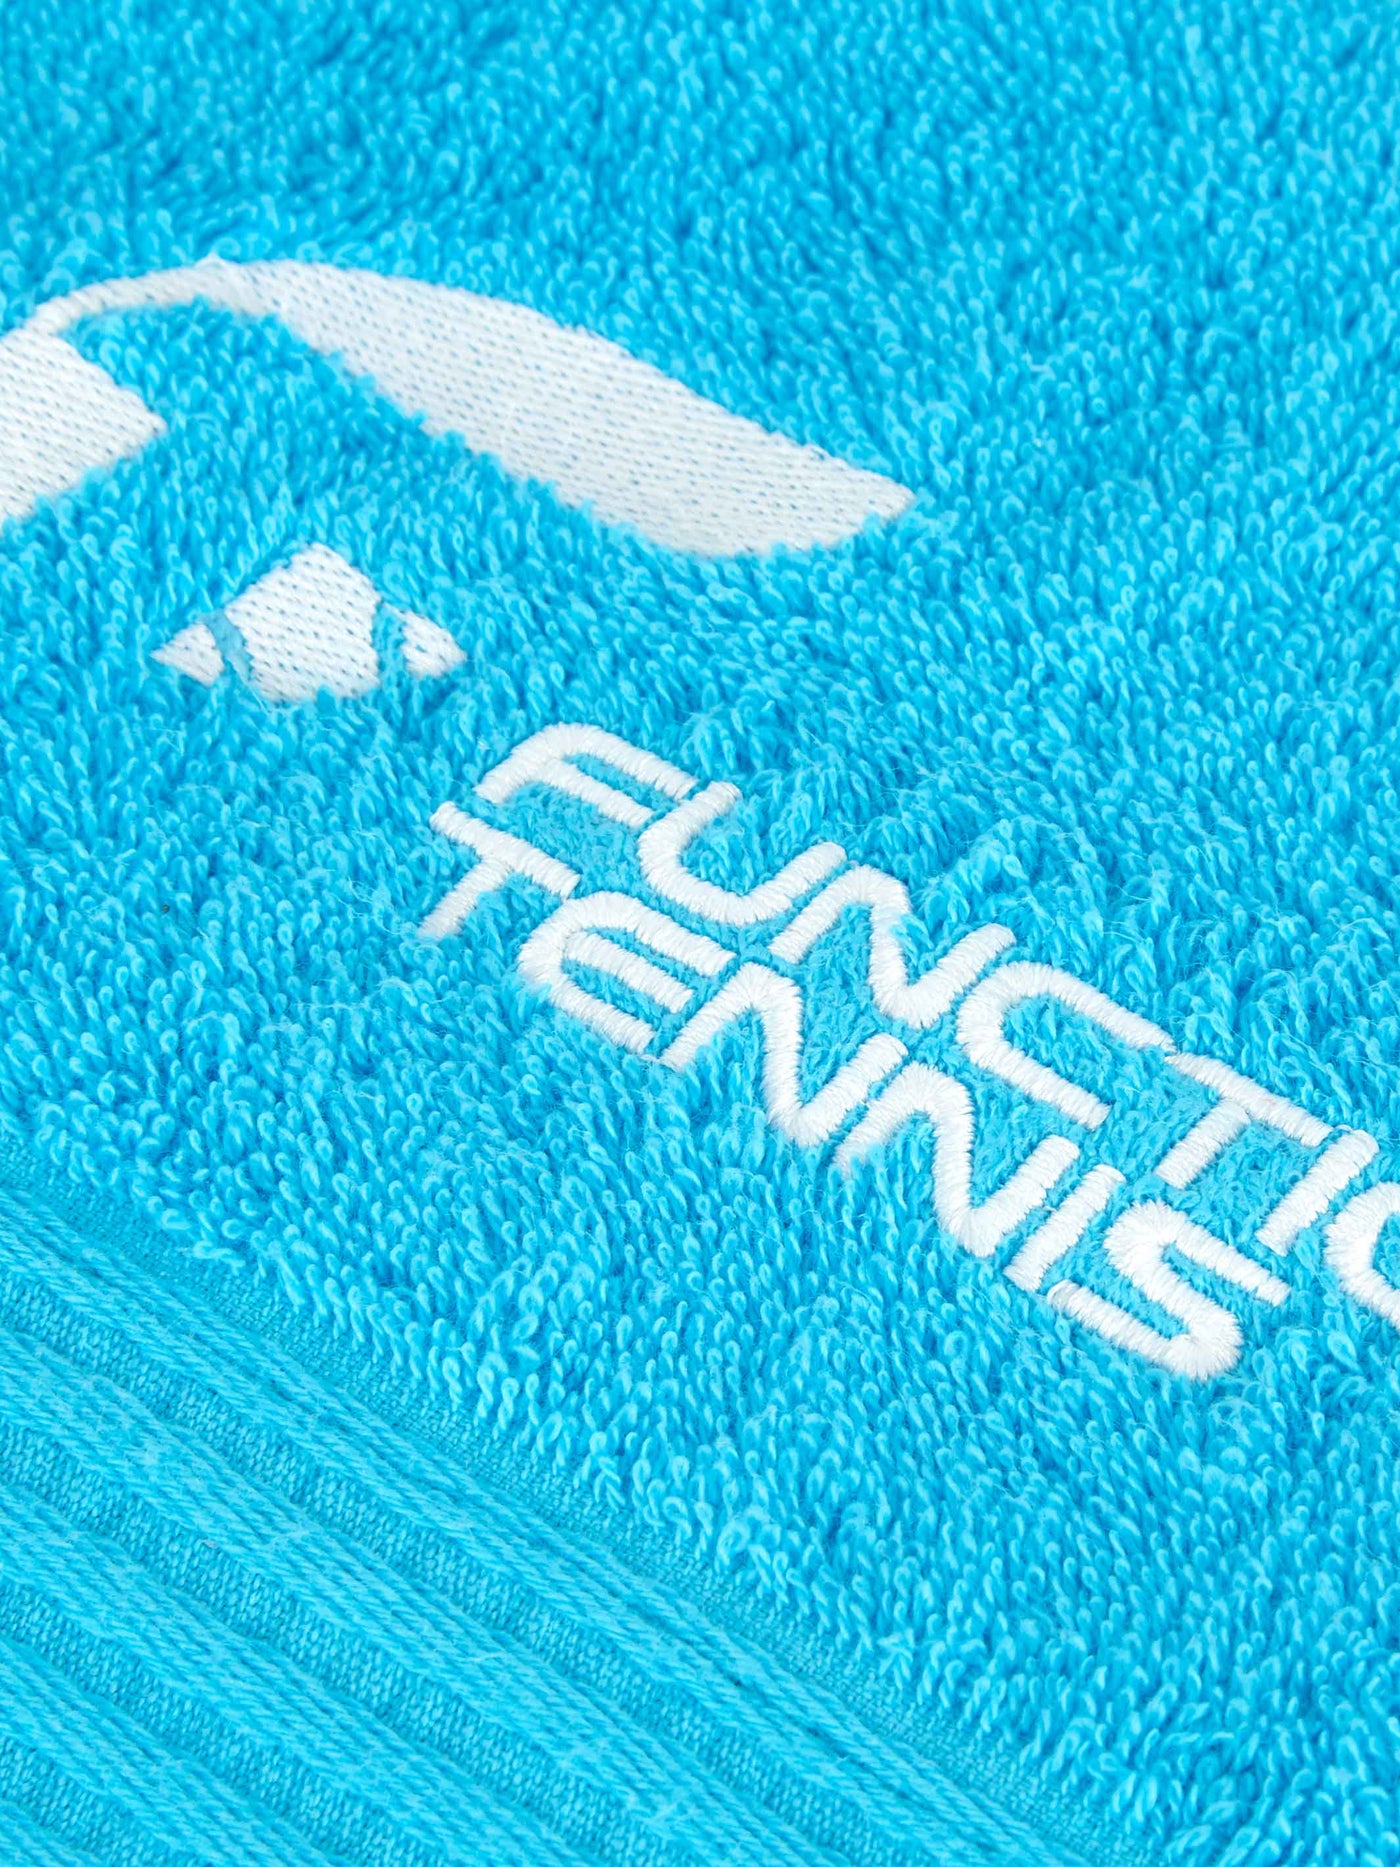 The Functional Tennis Match Towel